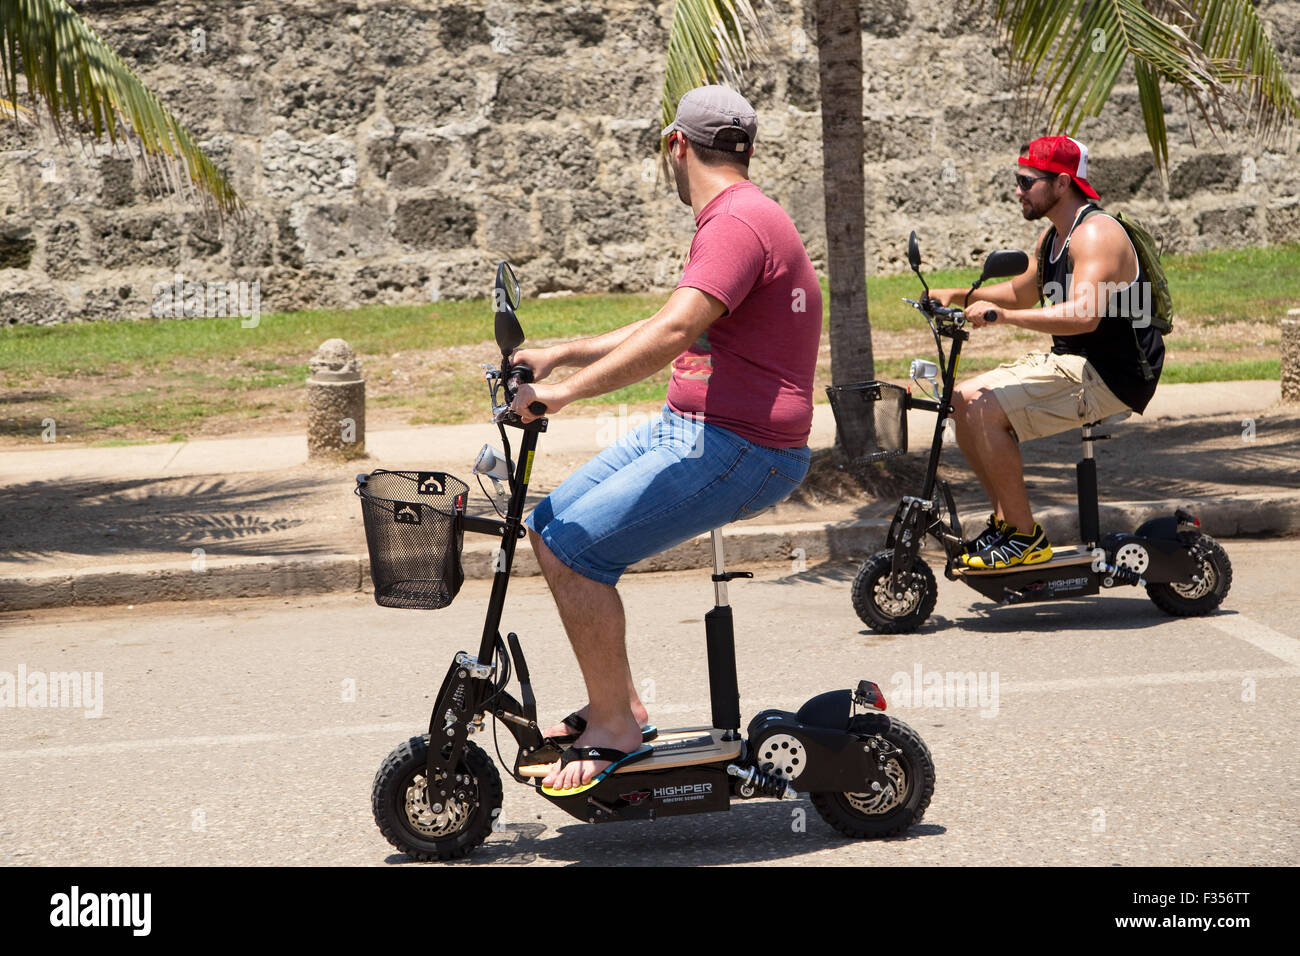 CARTAGENA - SEPTEMBER 13TH: Unidentified men with electric scooters on September the 13th, 2015 in Cartagena, Colombia. Cartagen Stock Photo